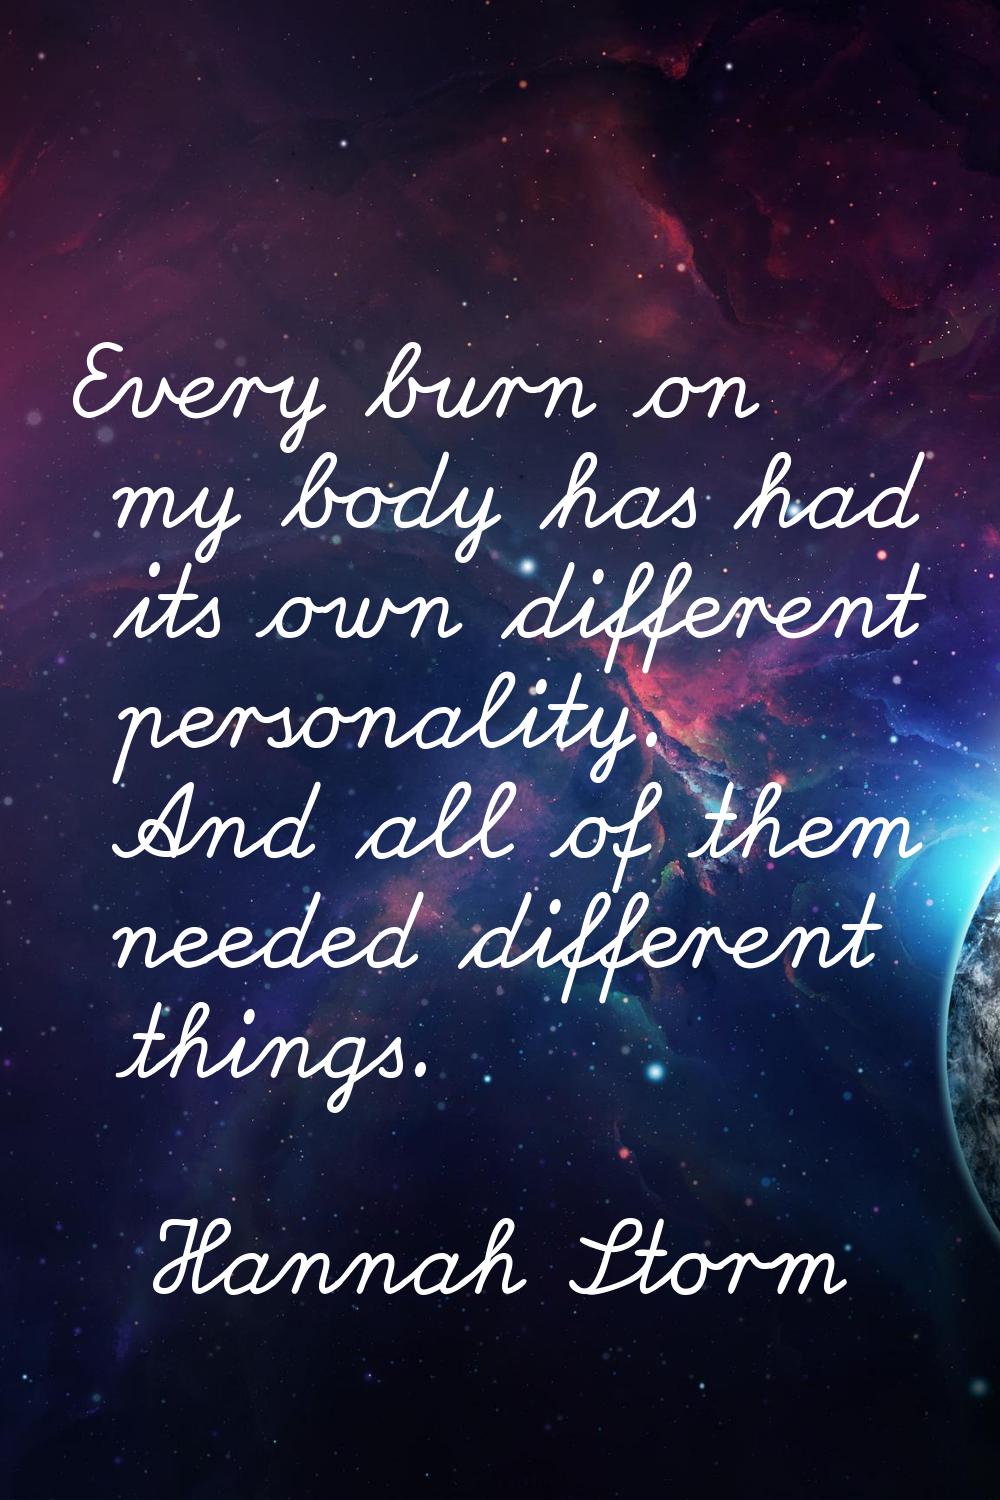 Every burn on my body has had its own different personality. And all of them needed different thing